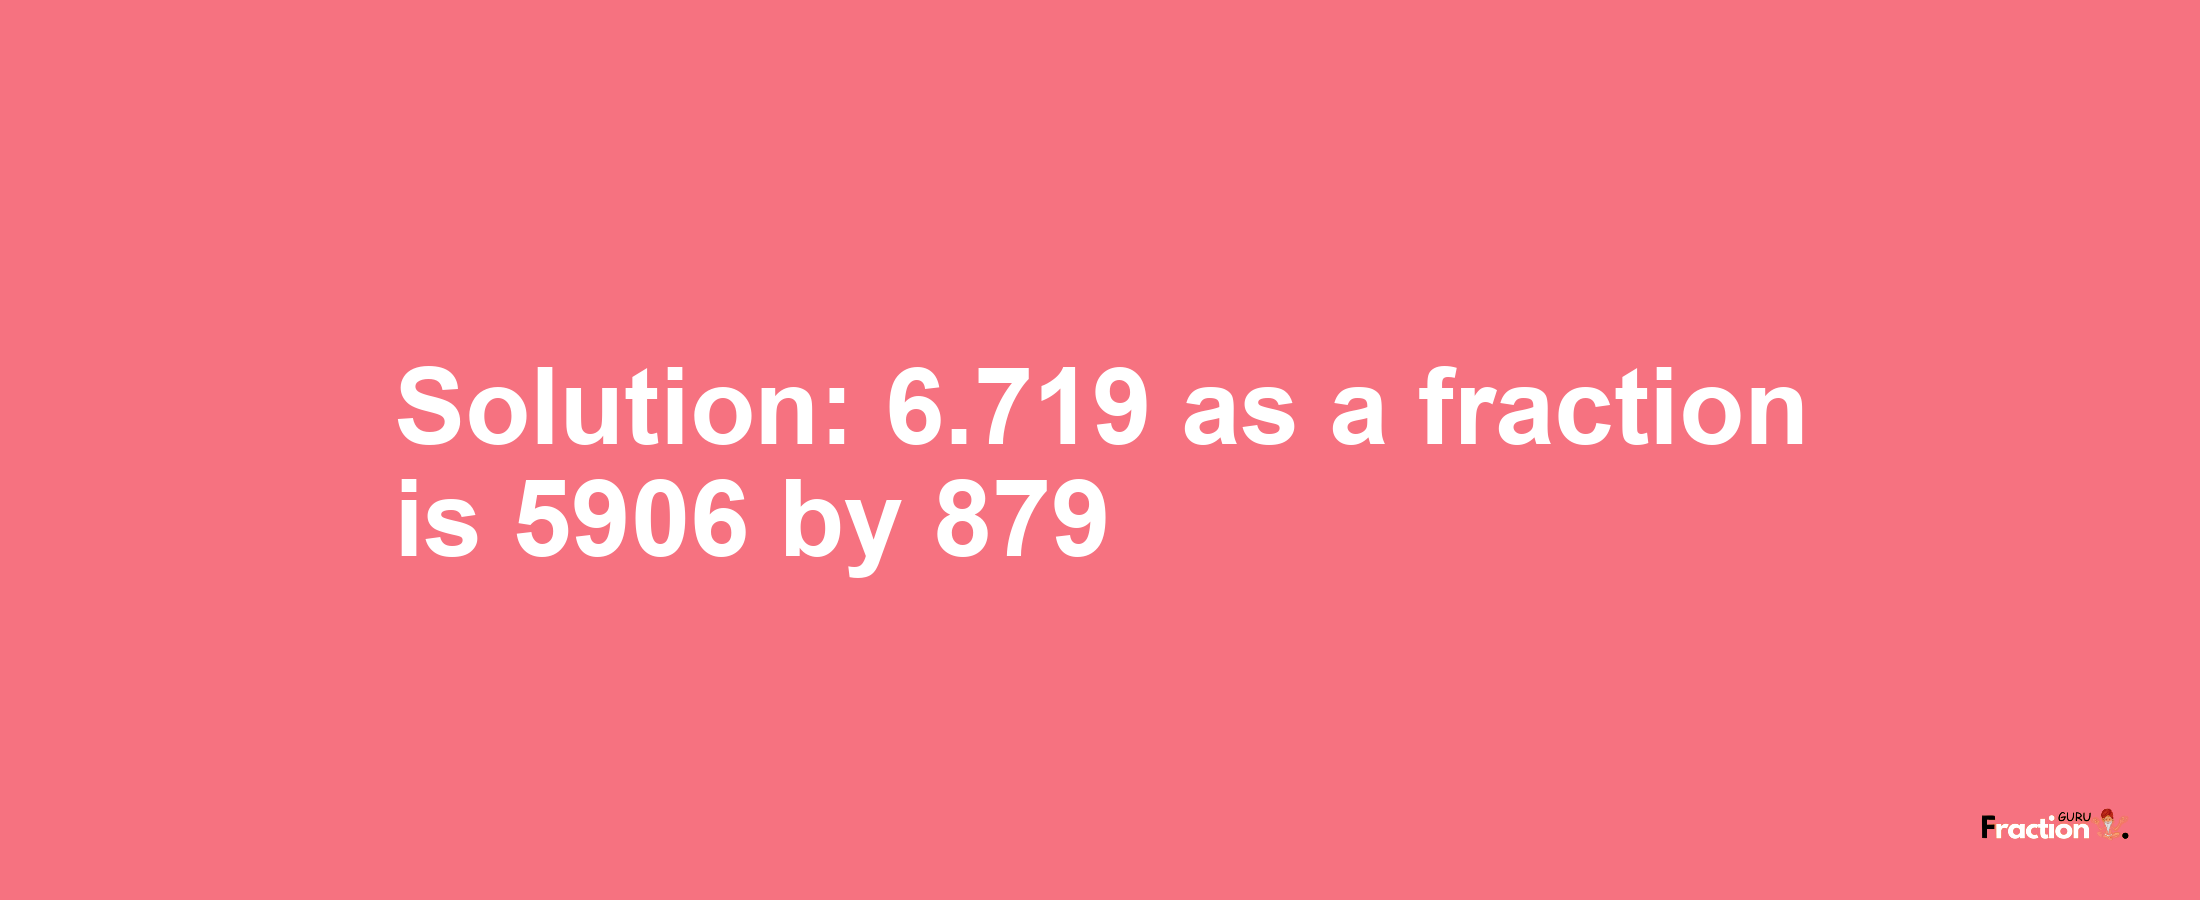 Solution:6.719 as a fraction is 5906/879